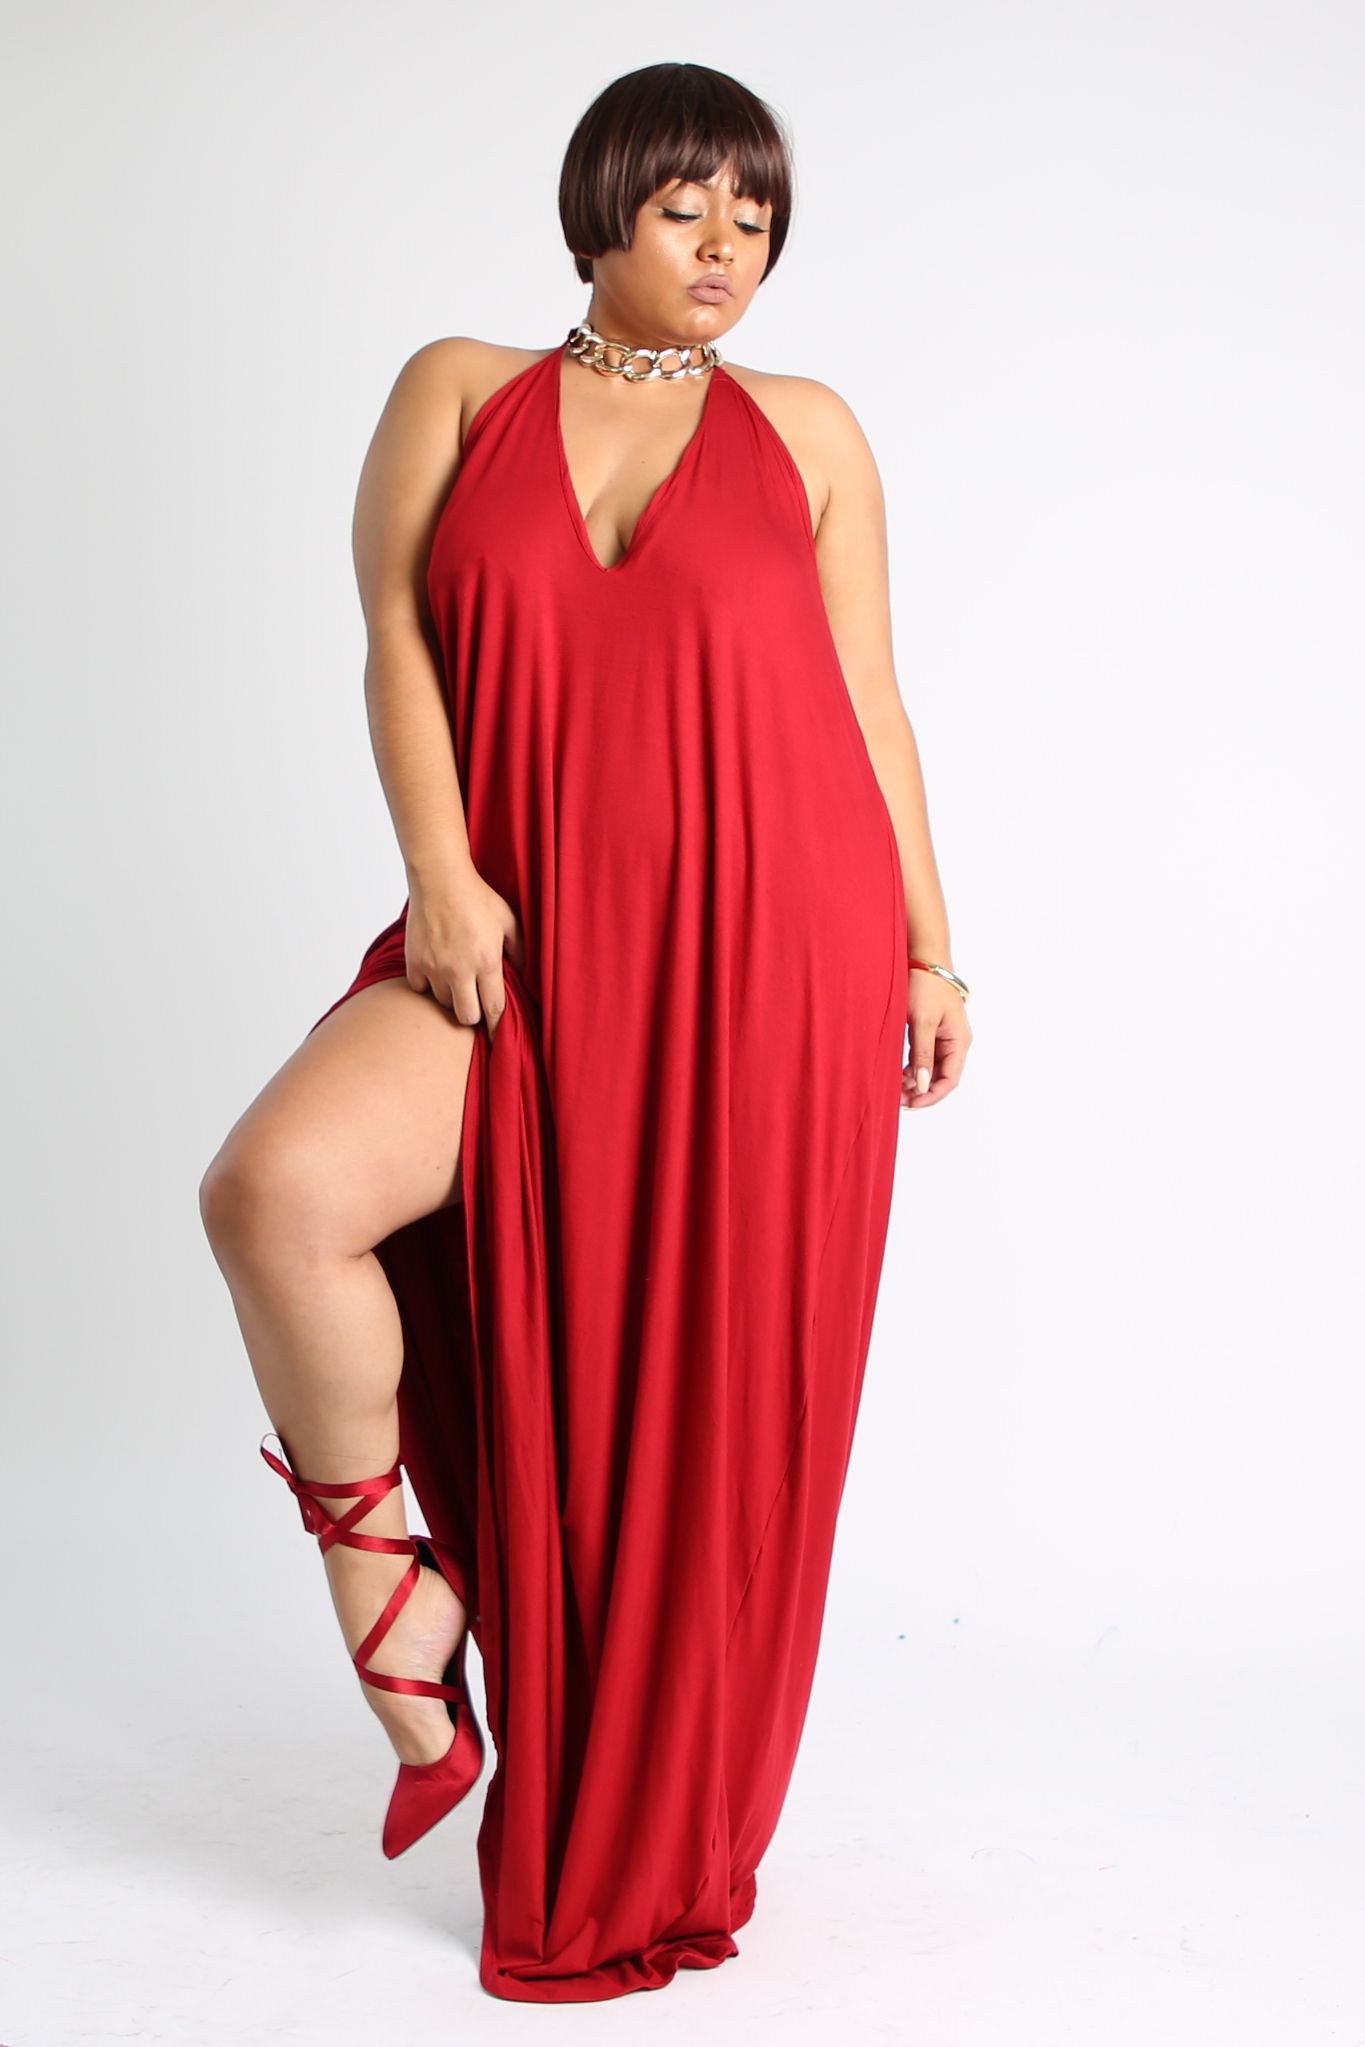 We Are Obsessed With The New Zelie For She Heart Breaker Plus Size Collection - Stylish Curves